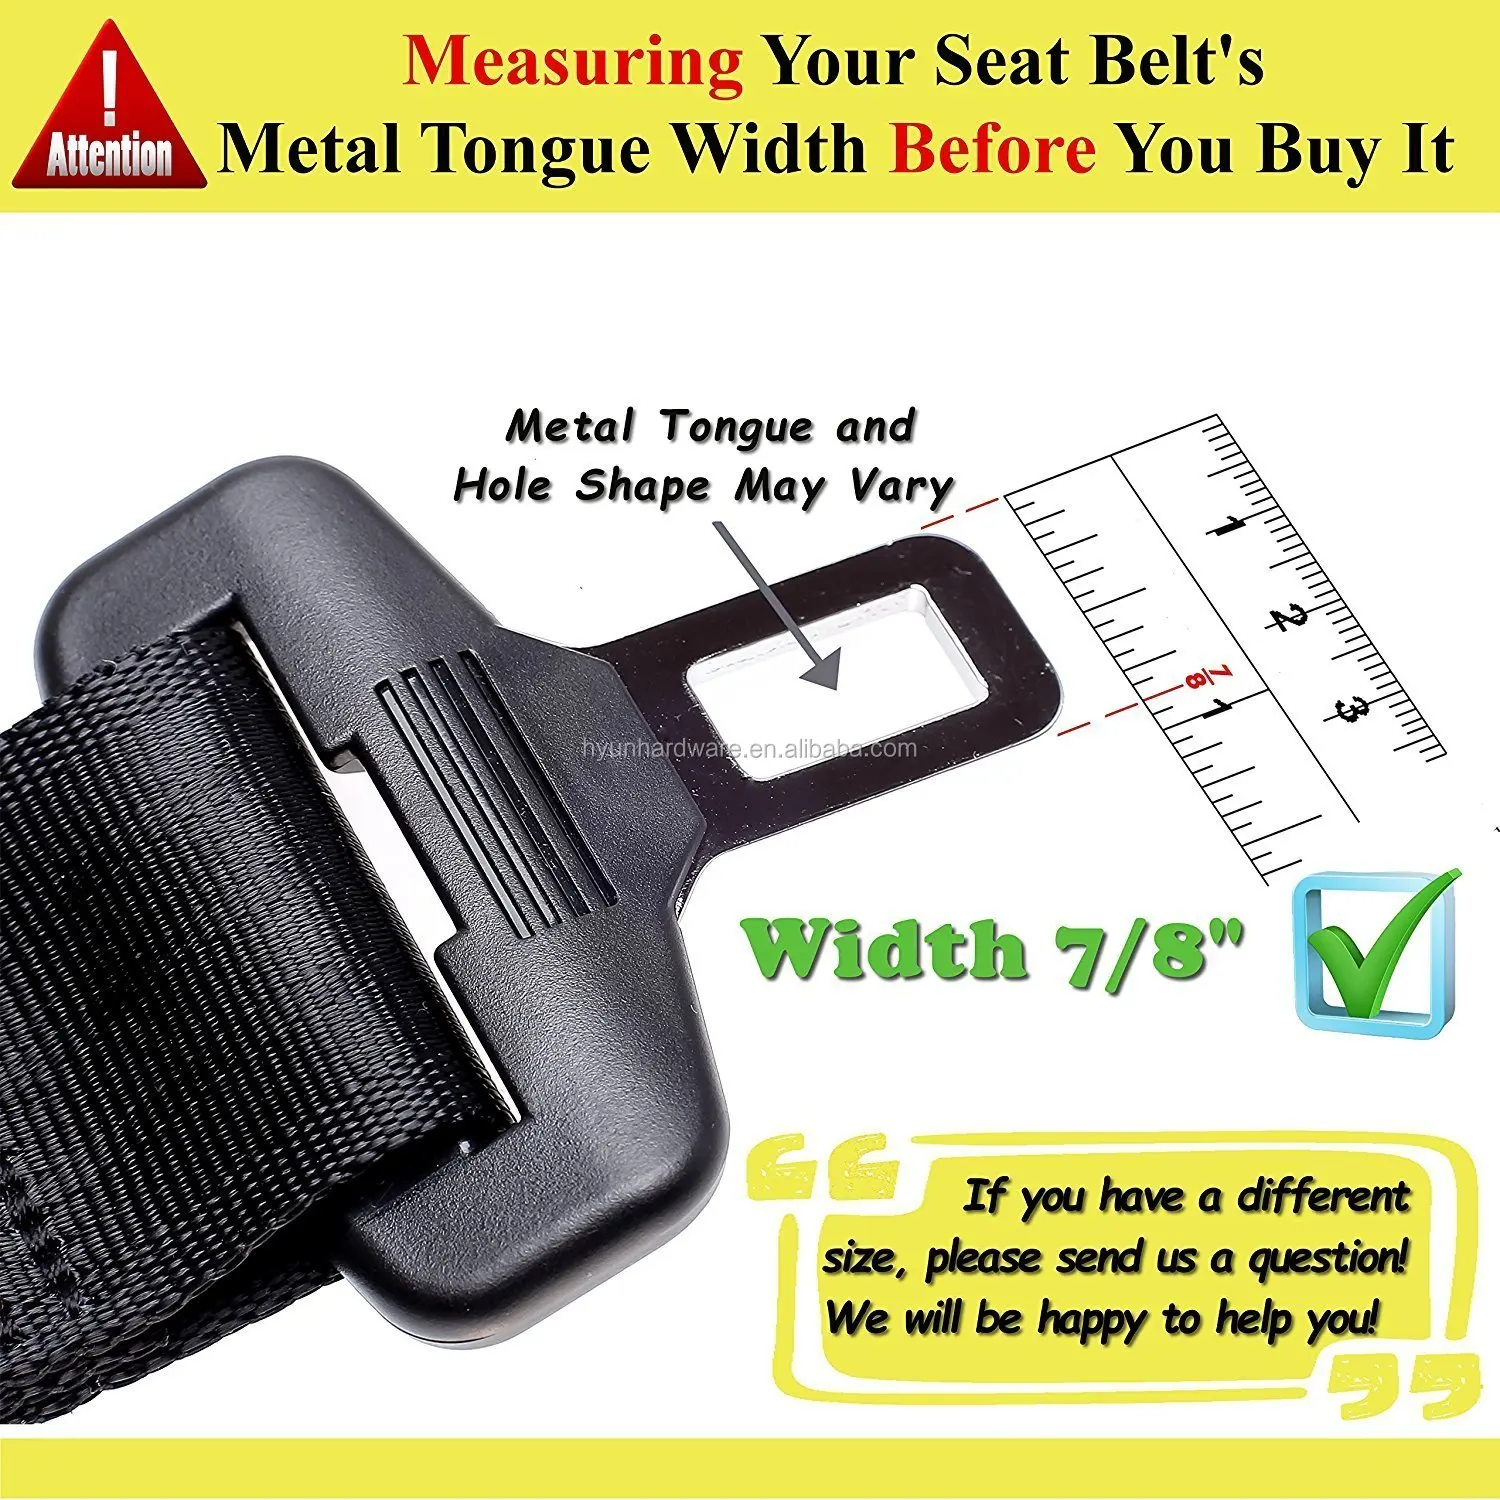 Rigid 7 Seat Belt Extension Black, 7/8 Tongue Width - E-Mark Safety Certificate Buckle Up to Drive Safely 